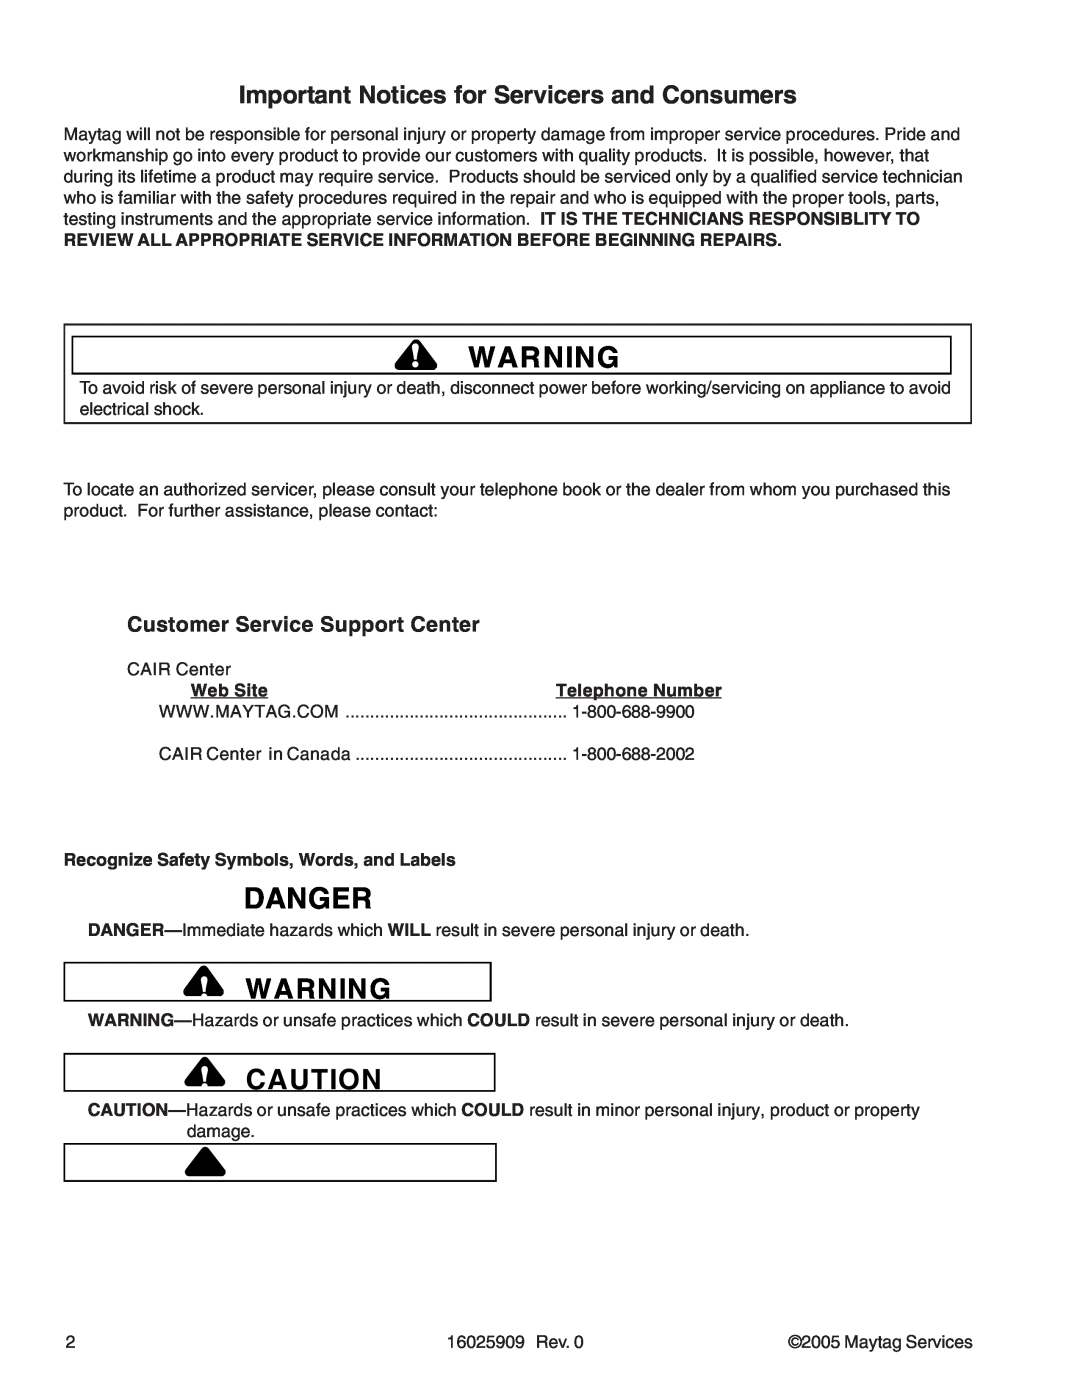 Whirlpool MAH9700AW Important Notices for Servicers and Consumers, Customer Service Support Center, Danger, CAIR Center 